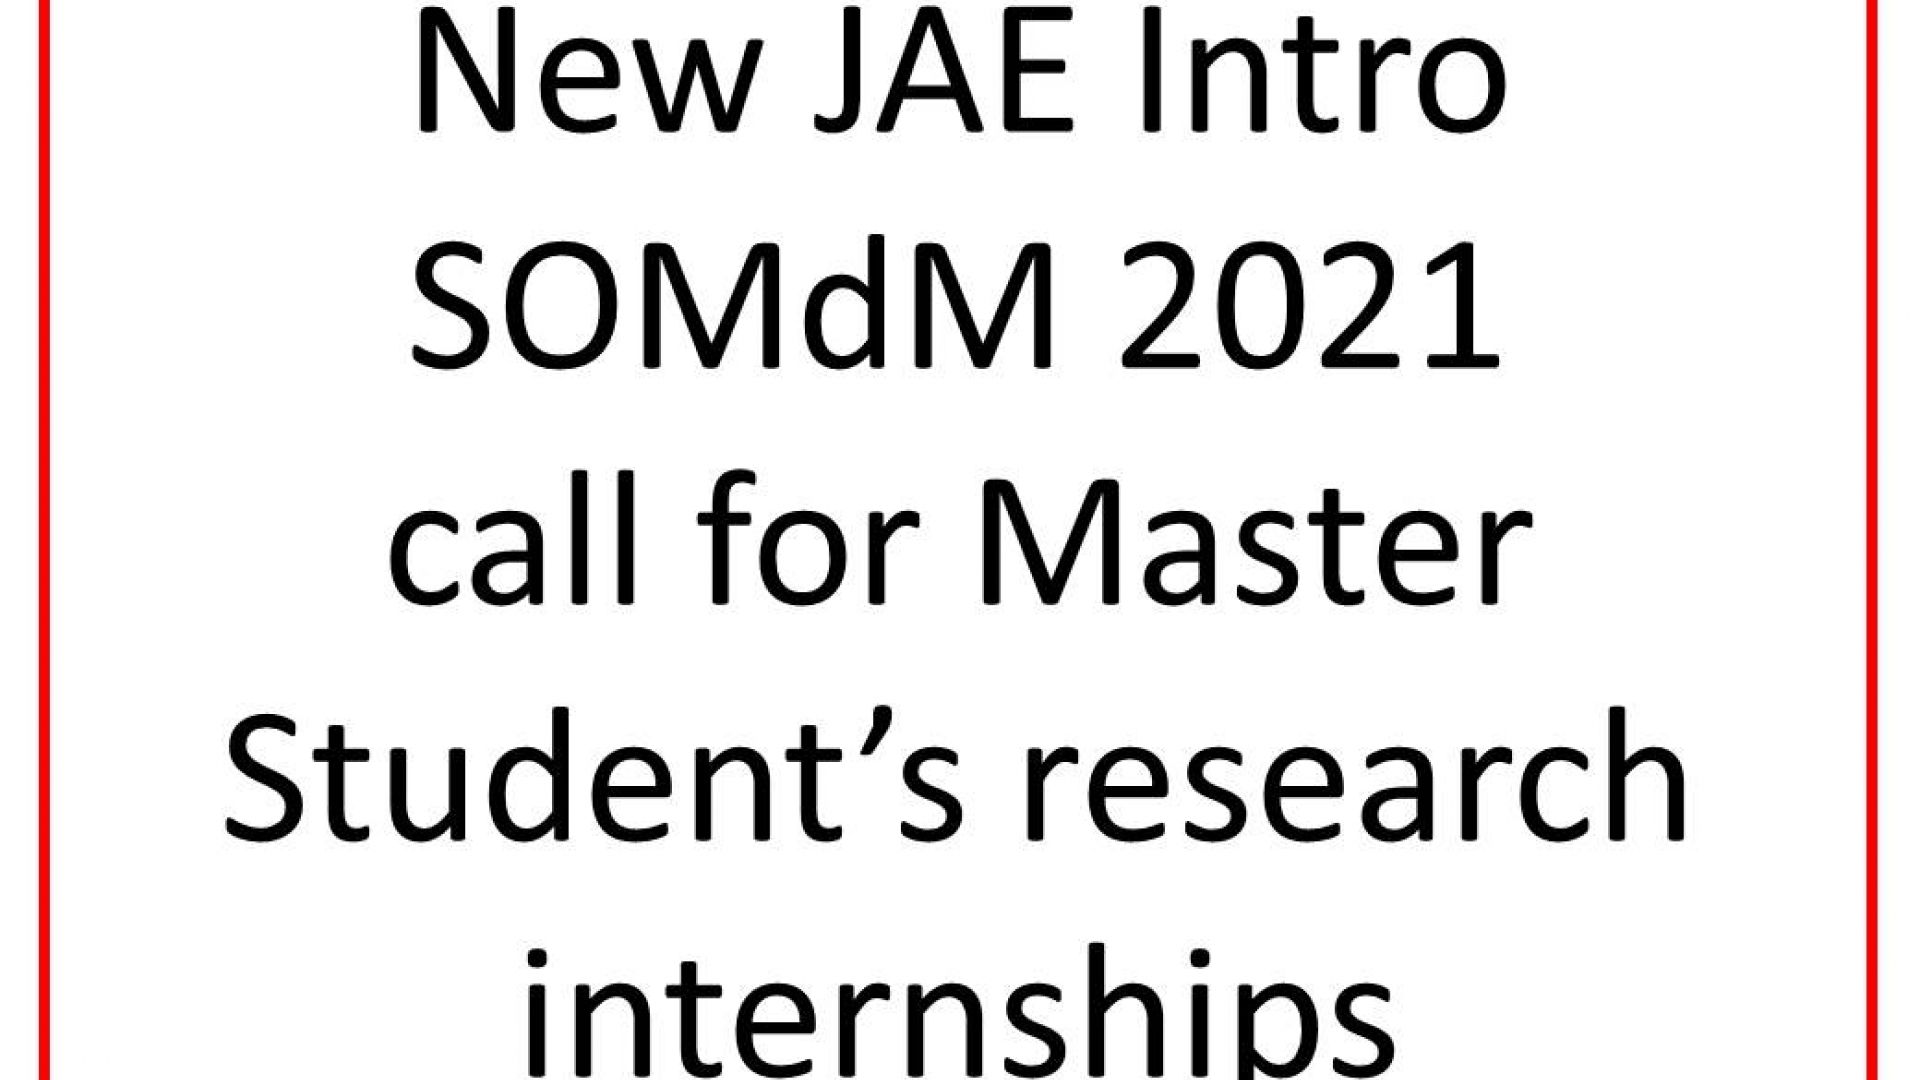 New JAE Intro SOMdM 2021 call for Master Student’s research internships